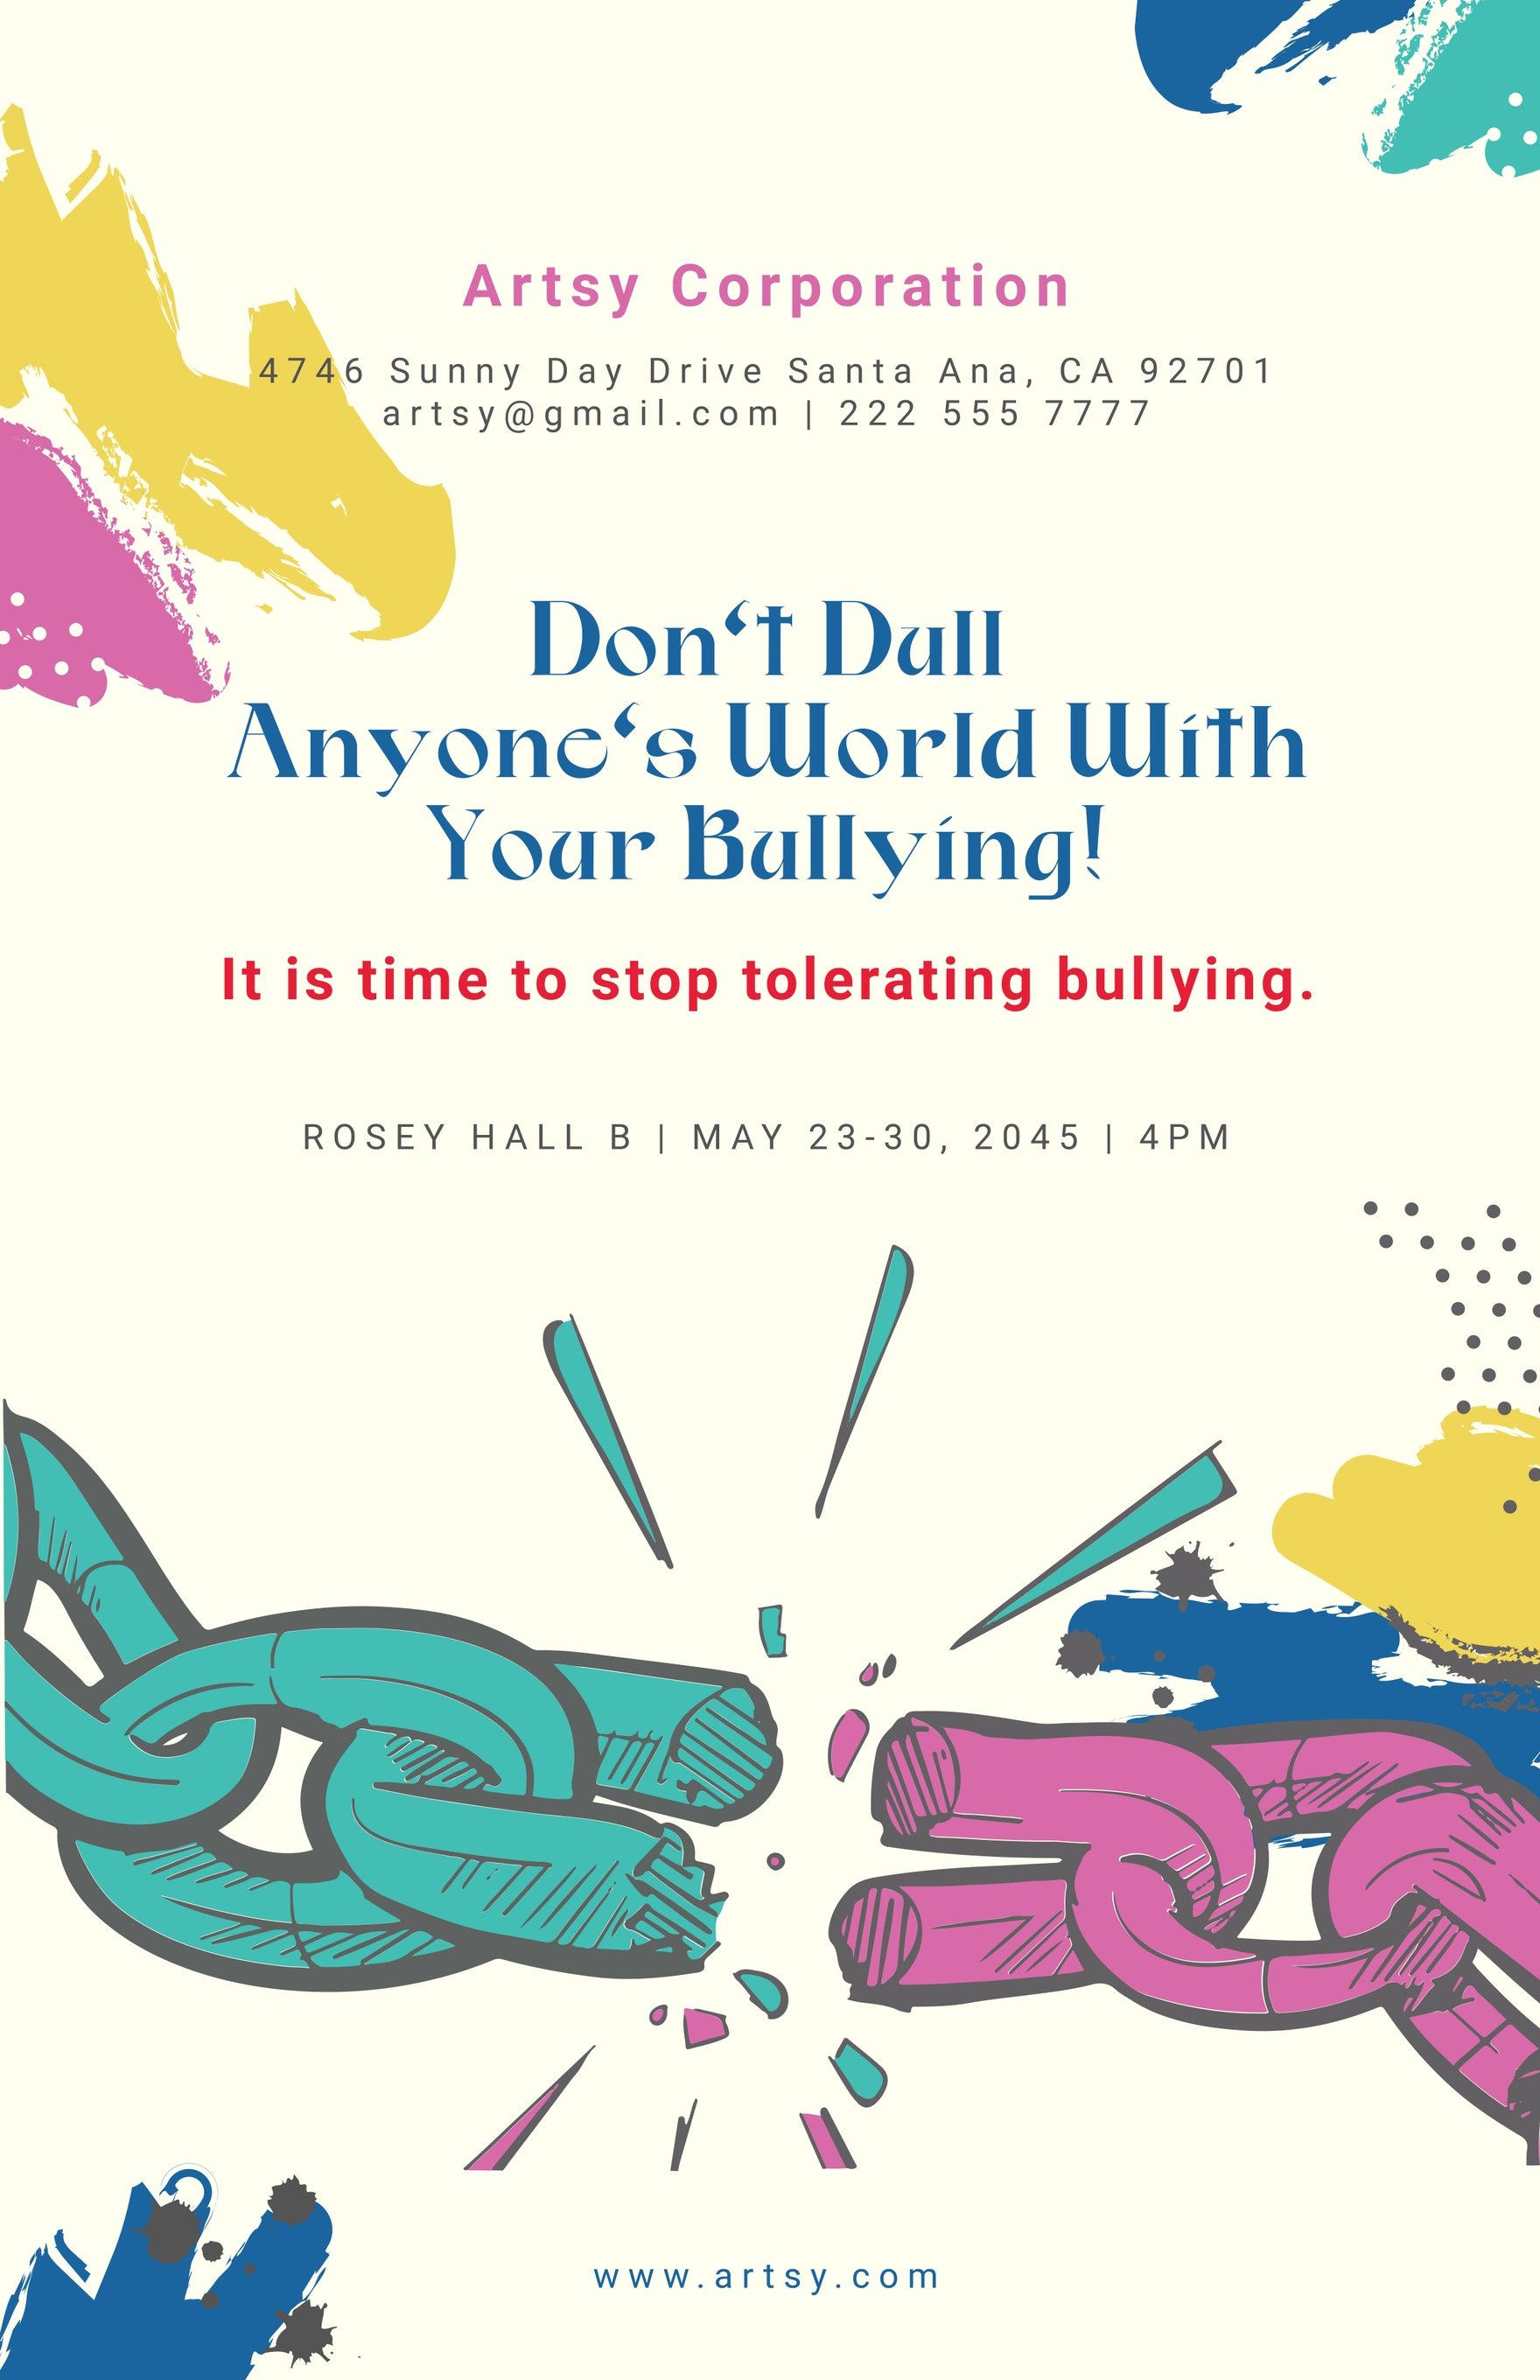 Free Colorful Anti-bullying Poster in Word, Illustrator, PSD, Publisher